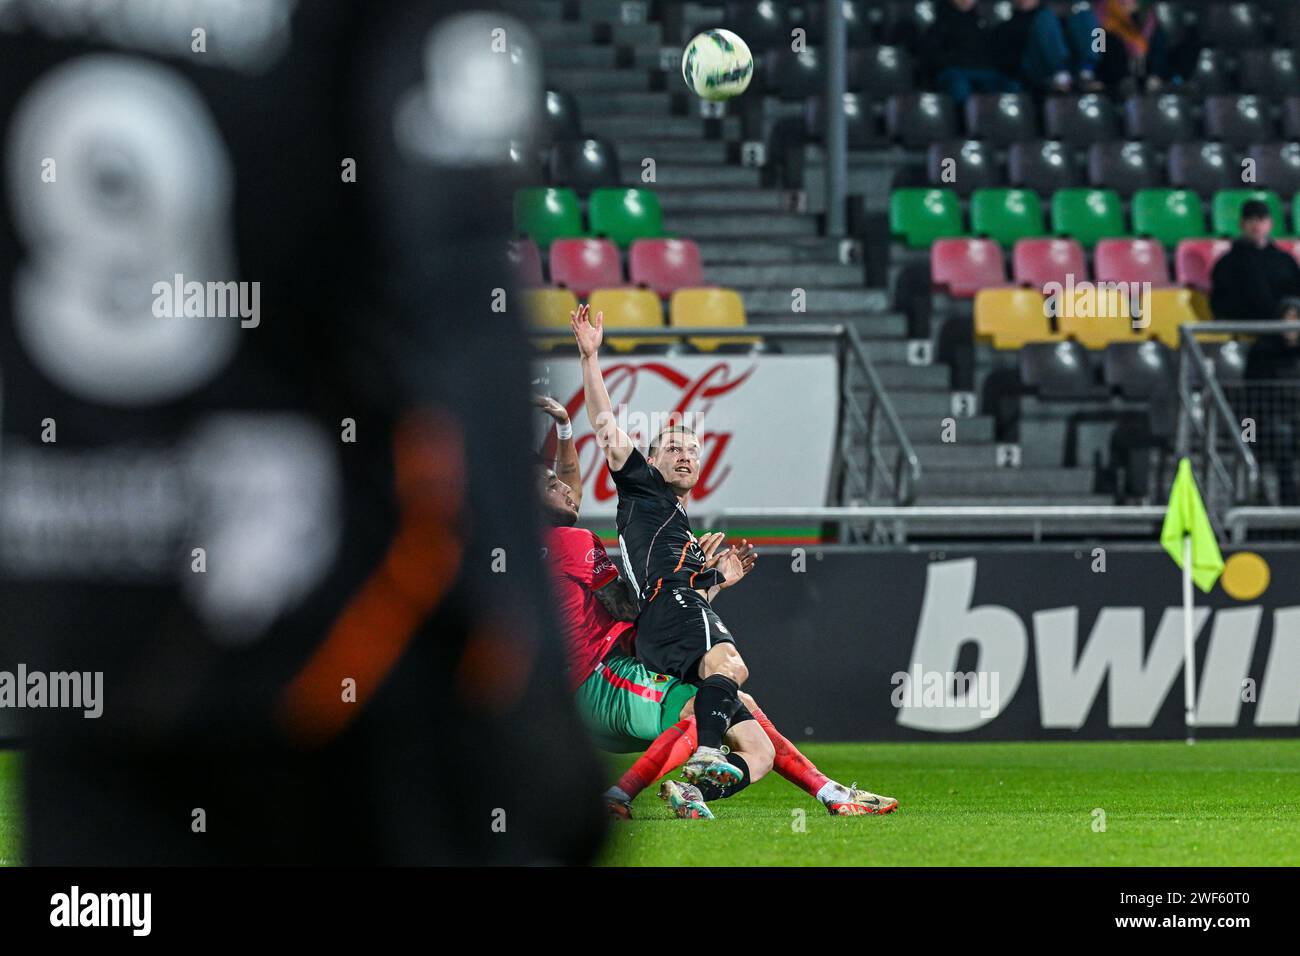 Oostende, Belgium. 28th Jan, 2024. Daniel Perez (9) of Oostende and Gonzalo Almenara (77) of KMSK Deinze pictured during a soccer game between KV Oostende and KMSK Deinze19th matchday in the Challenger Pro League 2023-2024 season, on Sunday 28 January 2024 in Oostende, Belgium . Credit: sportpix/Alamy Live News Stock Photo